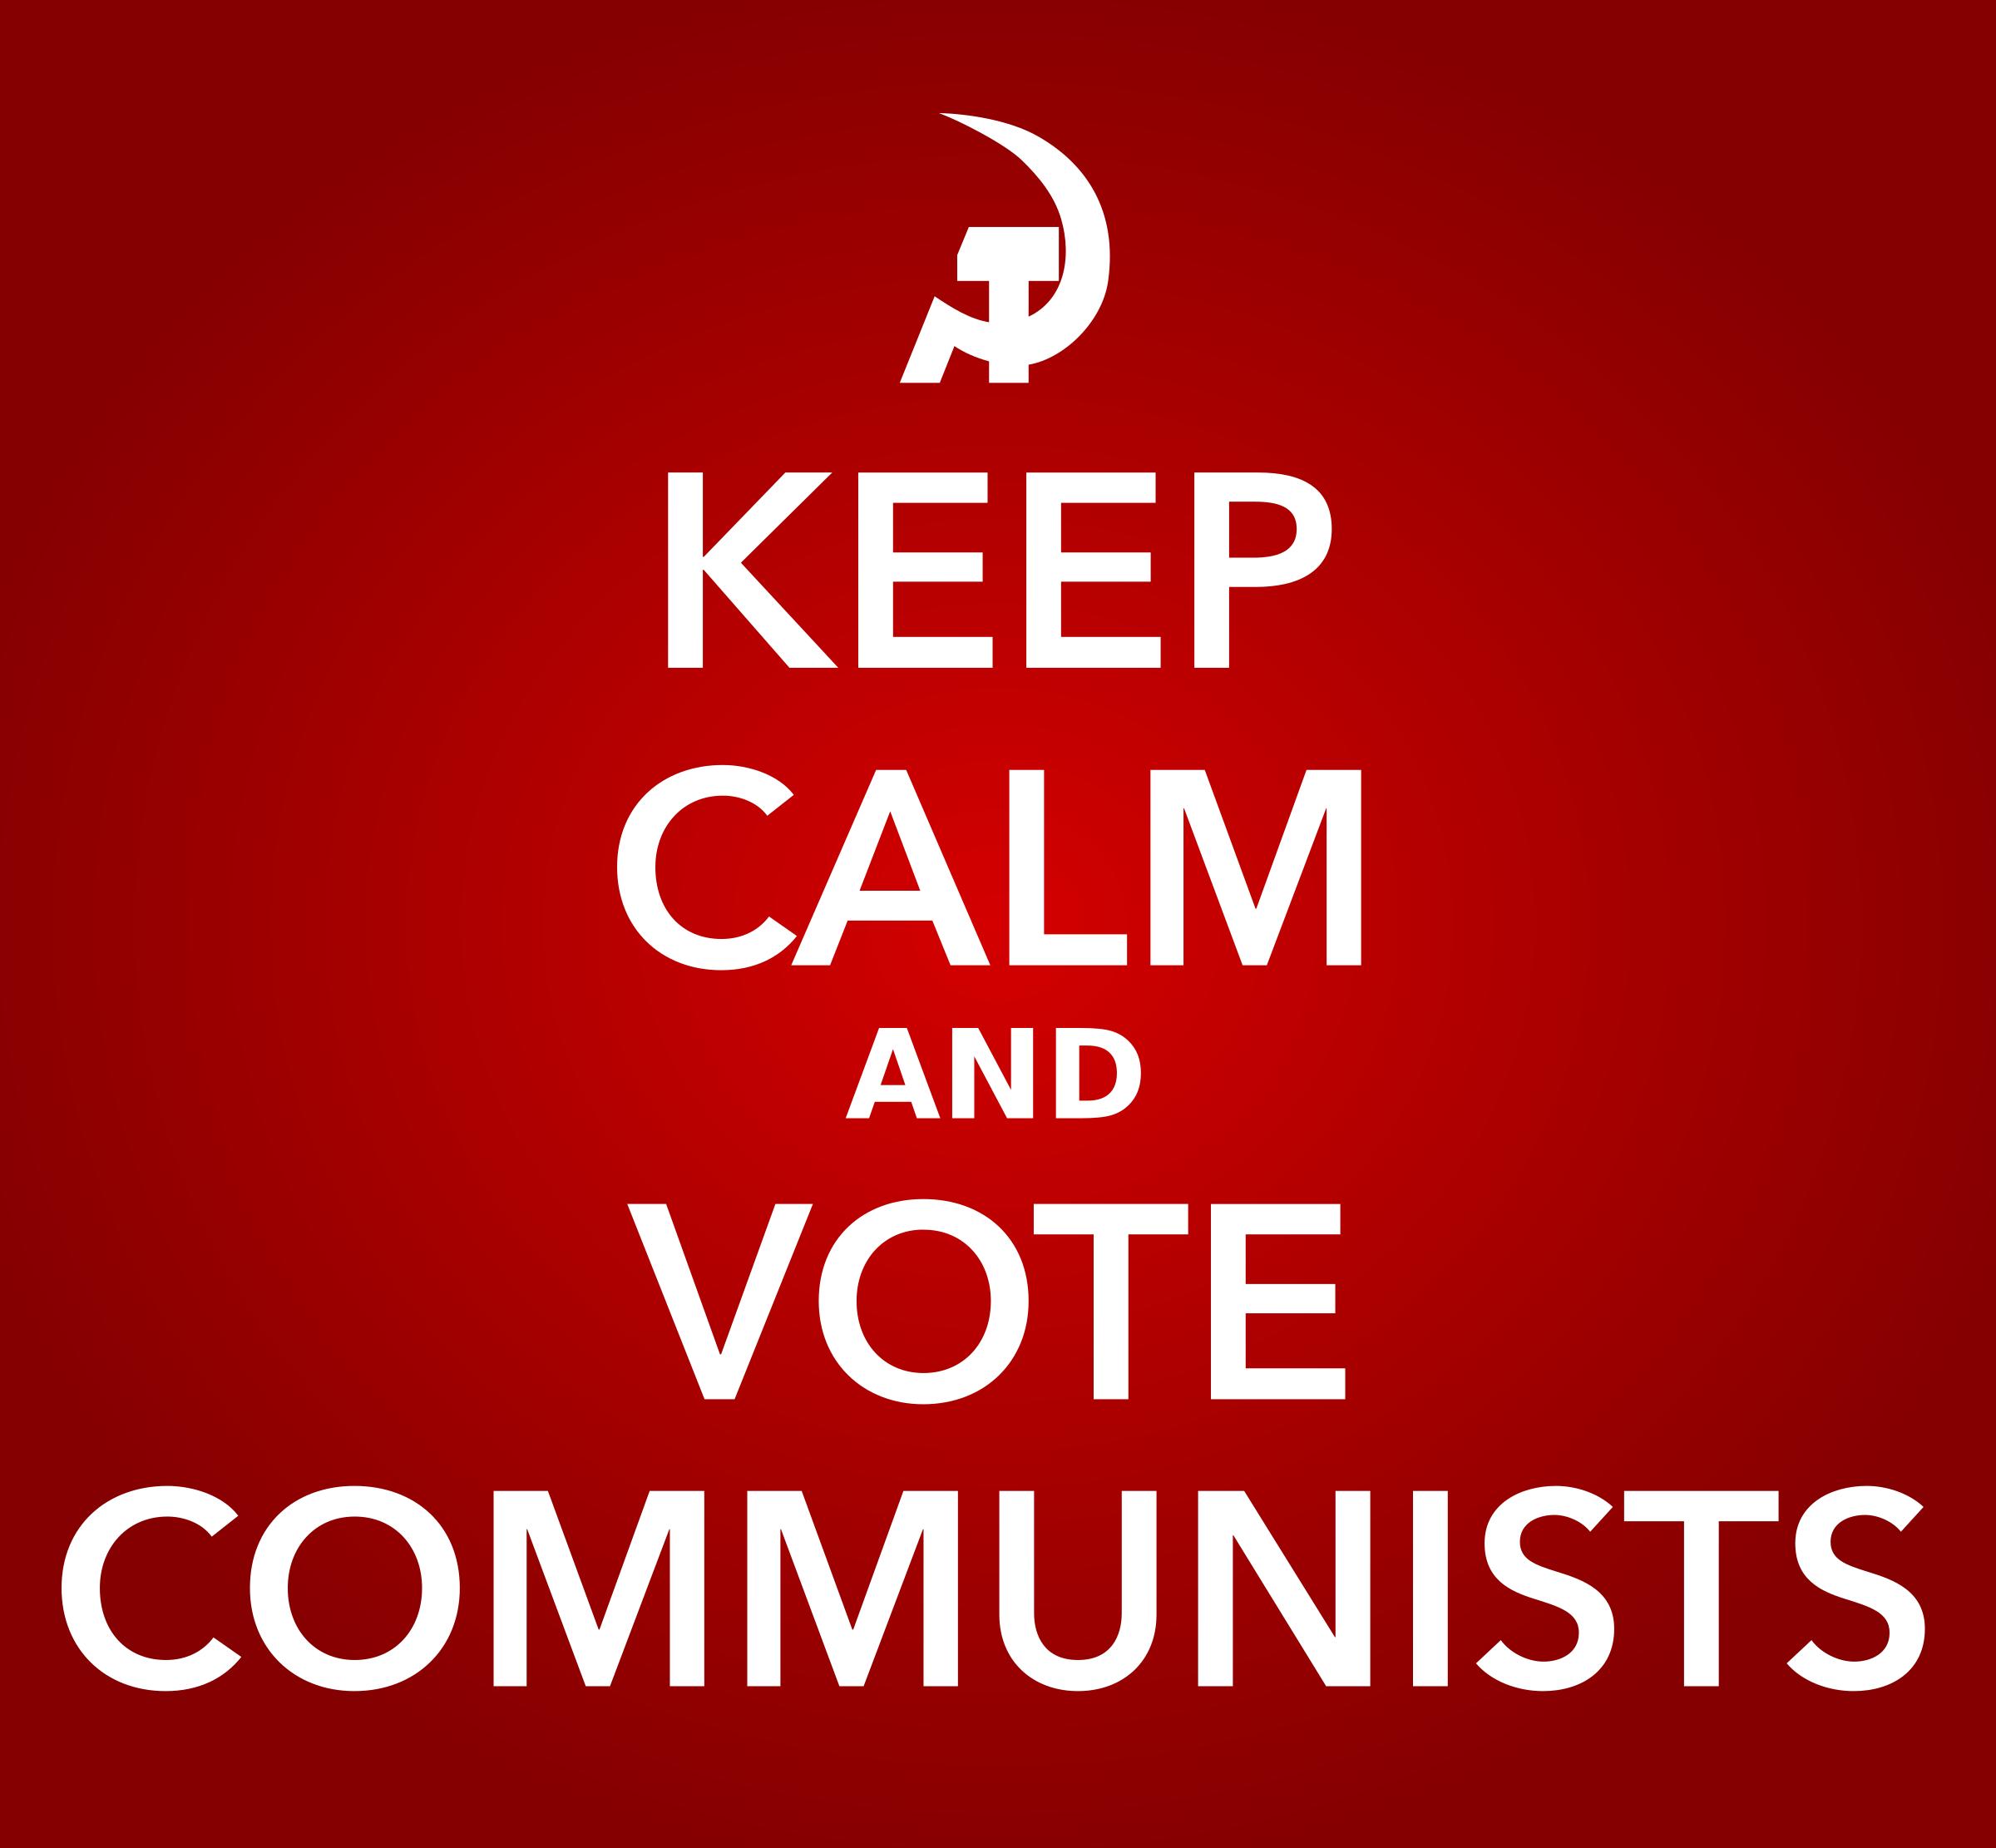 KEEP CALM AND VOTE COMMUNISTS png